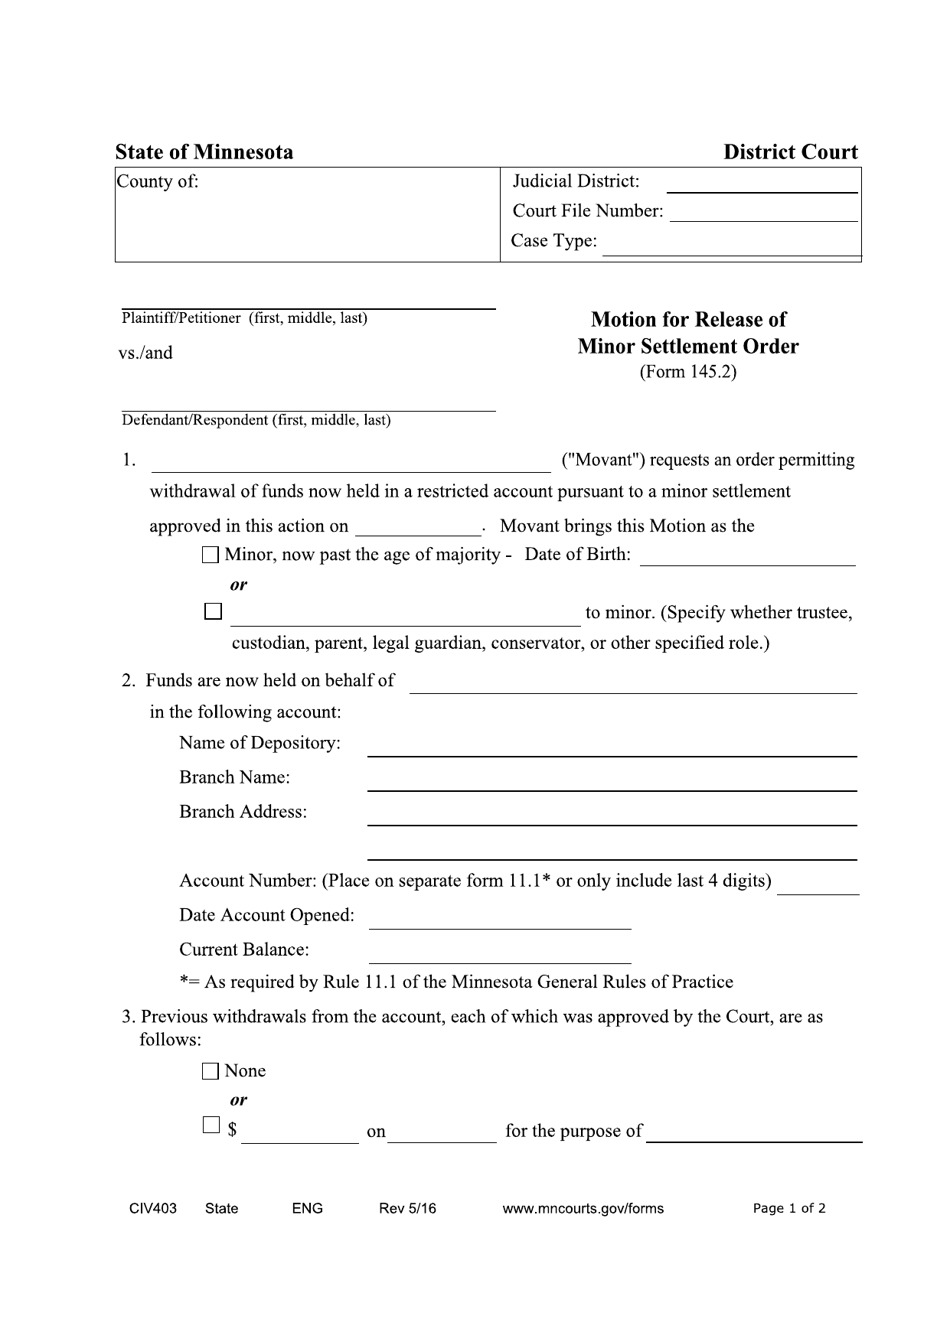 Form 145.2 (CIV403) Motion for Release of Minor Settlement Funds - Minnesota, Page 1